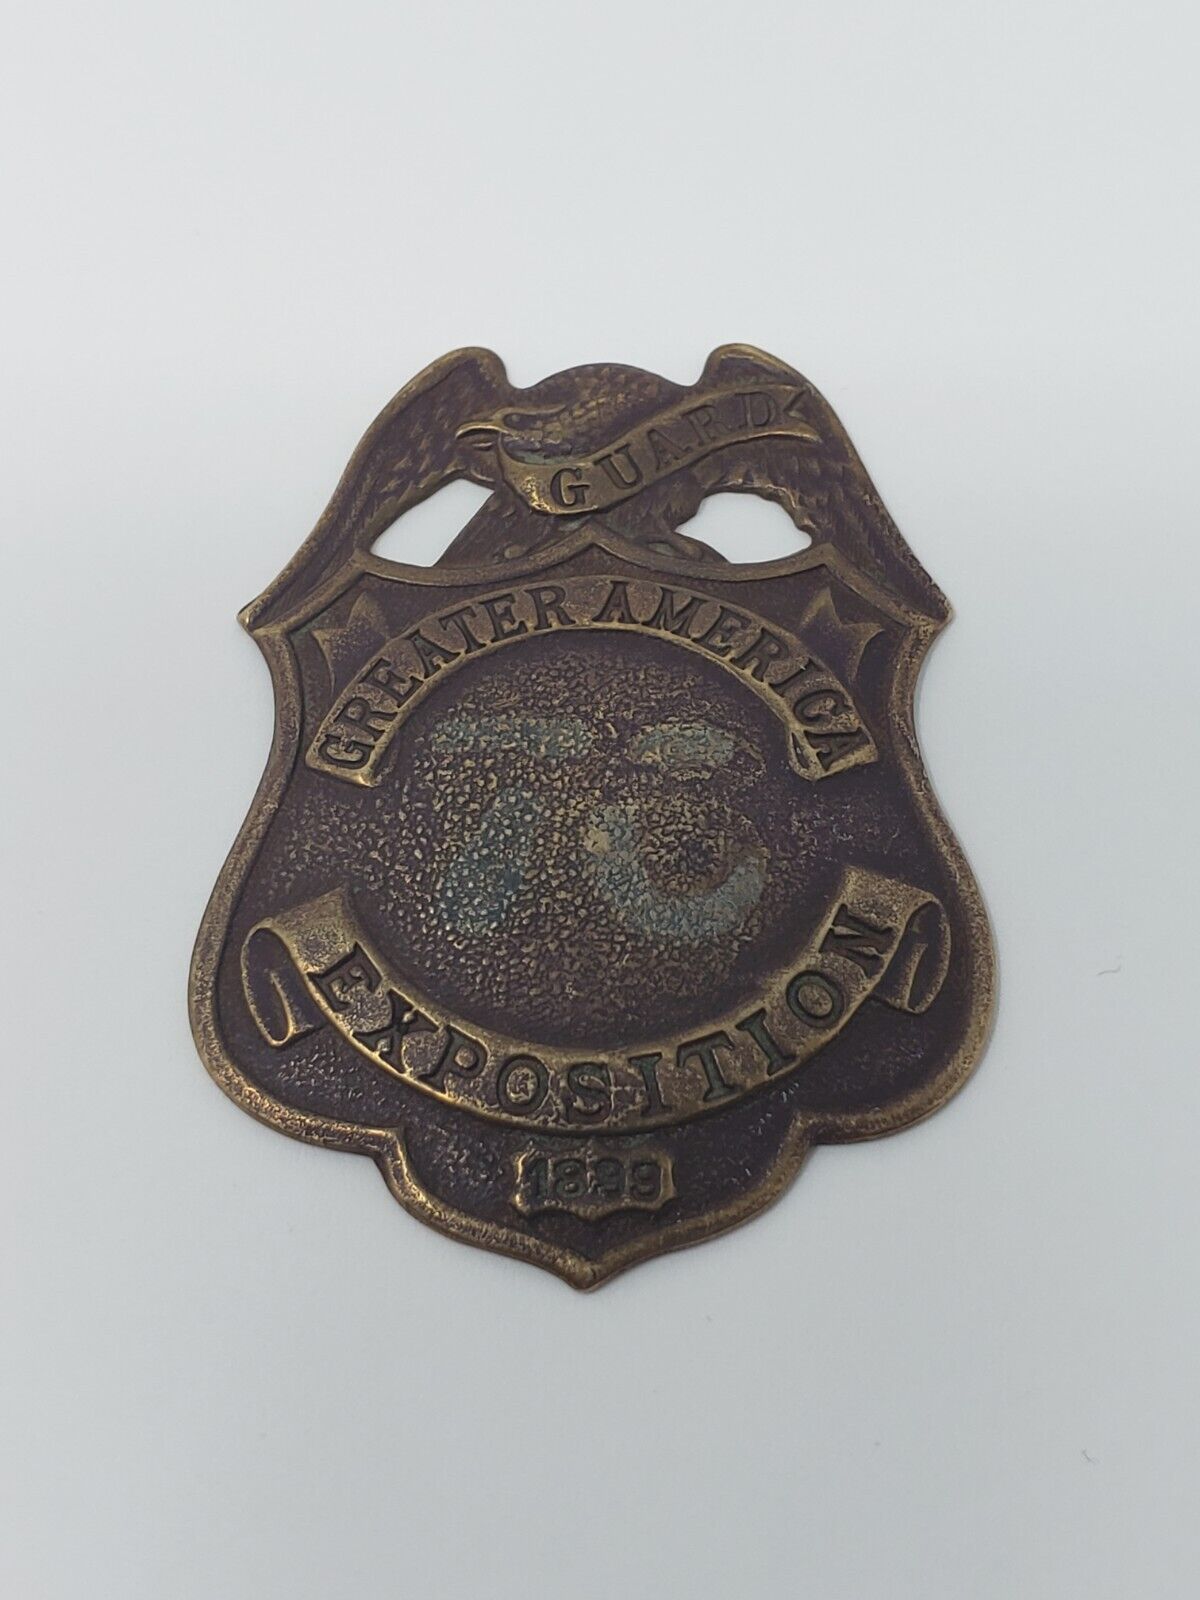 1899 Greater America Exposition Guard Badge Vintage